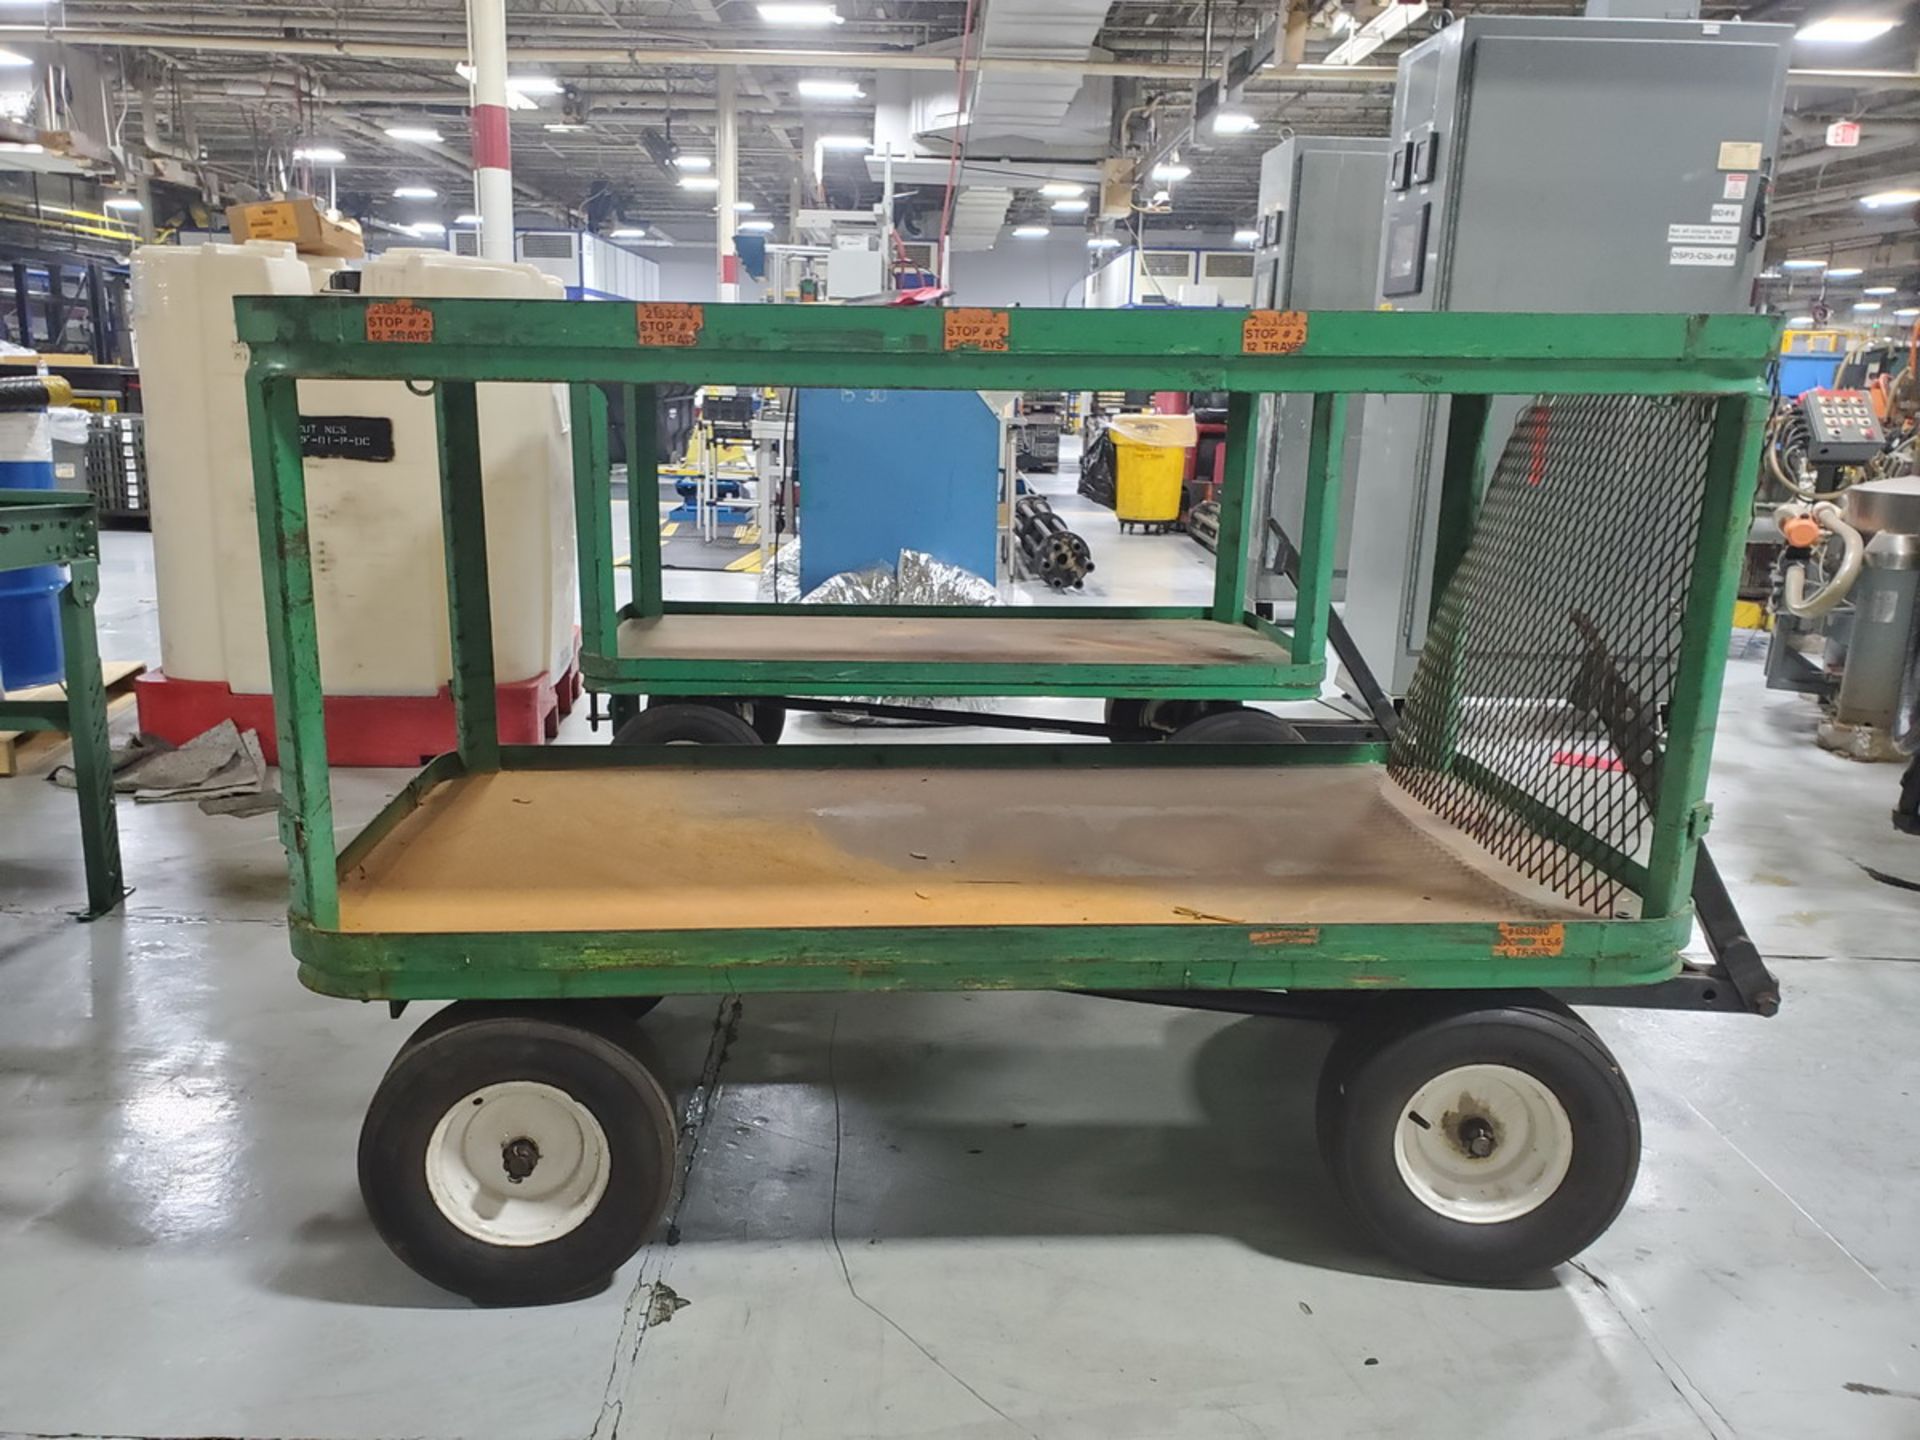 Lot - (2) 2-Tier Portable Steel Carts with Rubber Wheels; 6 ft. x 3 ft. x 4 ft. h - Image 3 of 5